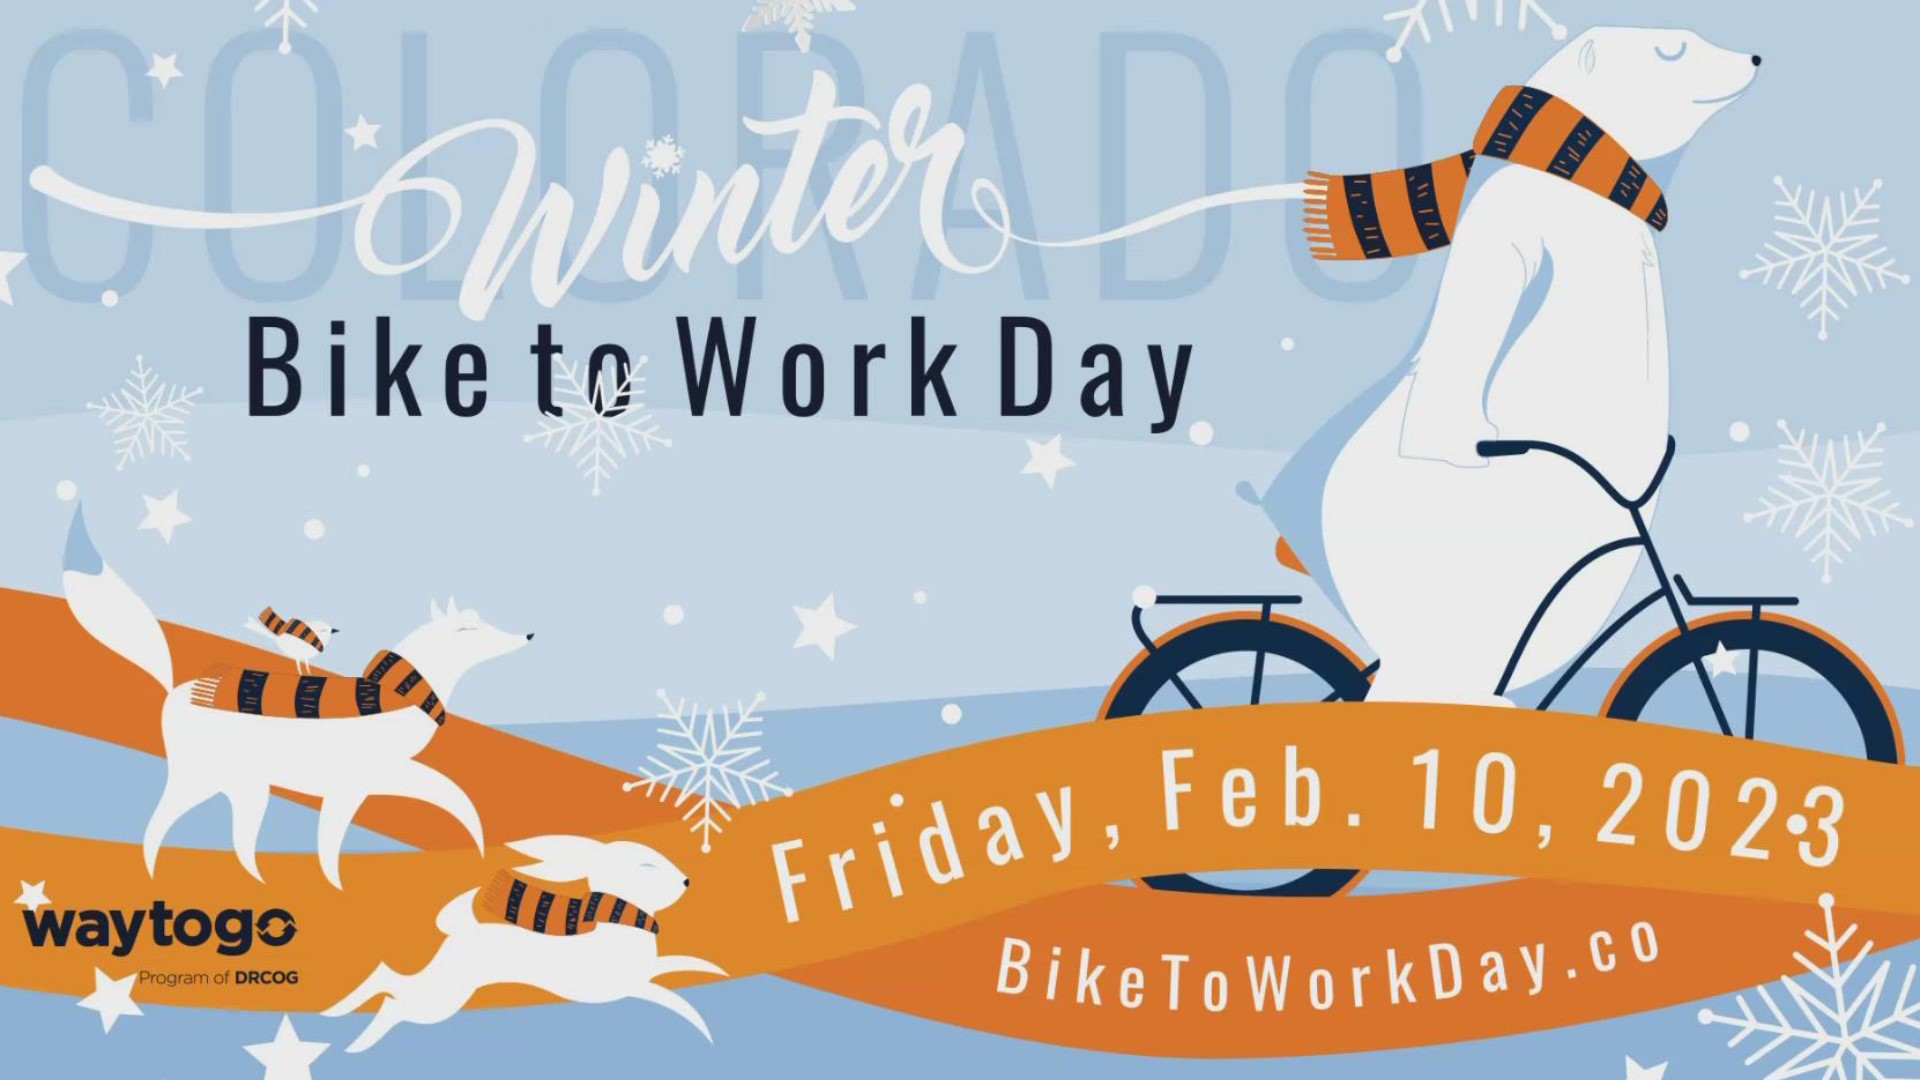 Winter Bike to Work Day is February 10th! Learn more and register at BikeToWorkDay.co. **PAID CONTENT**